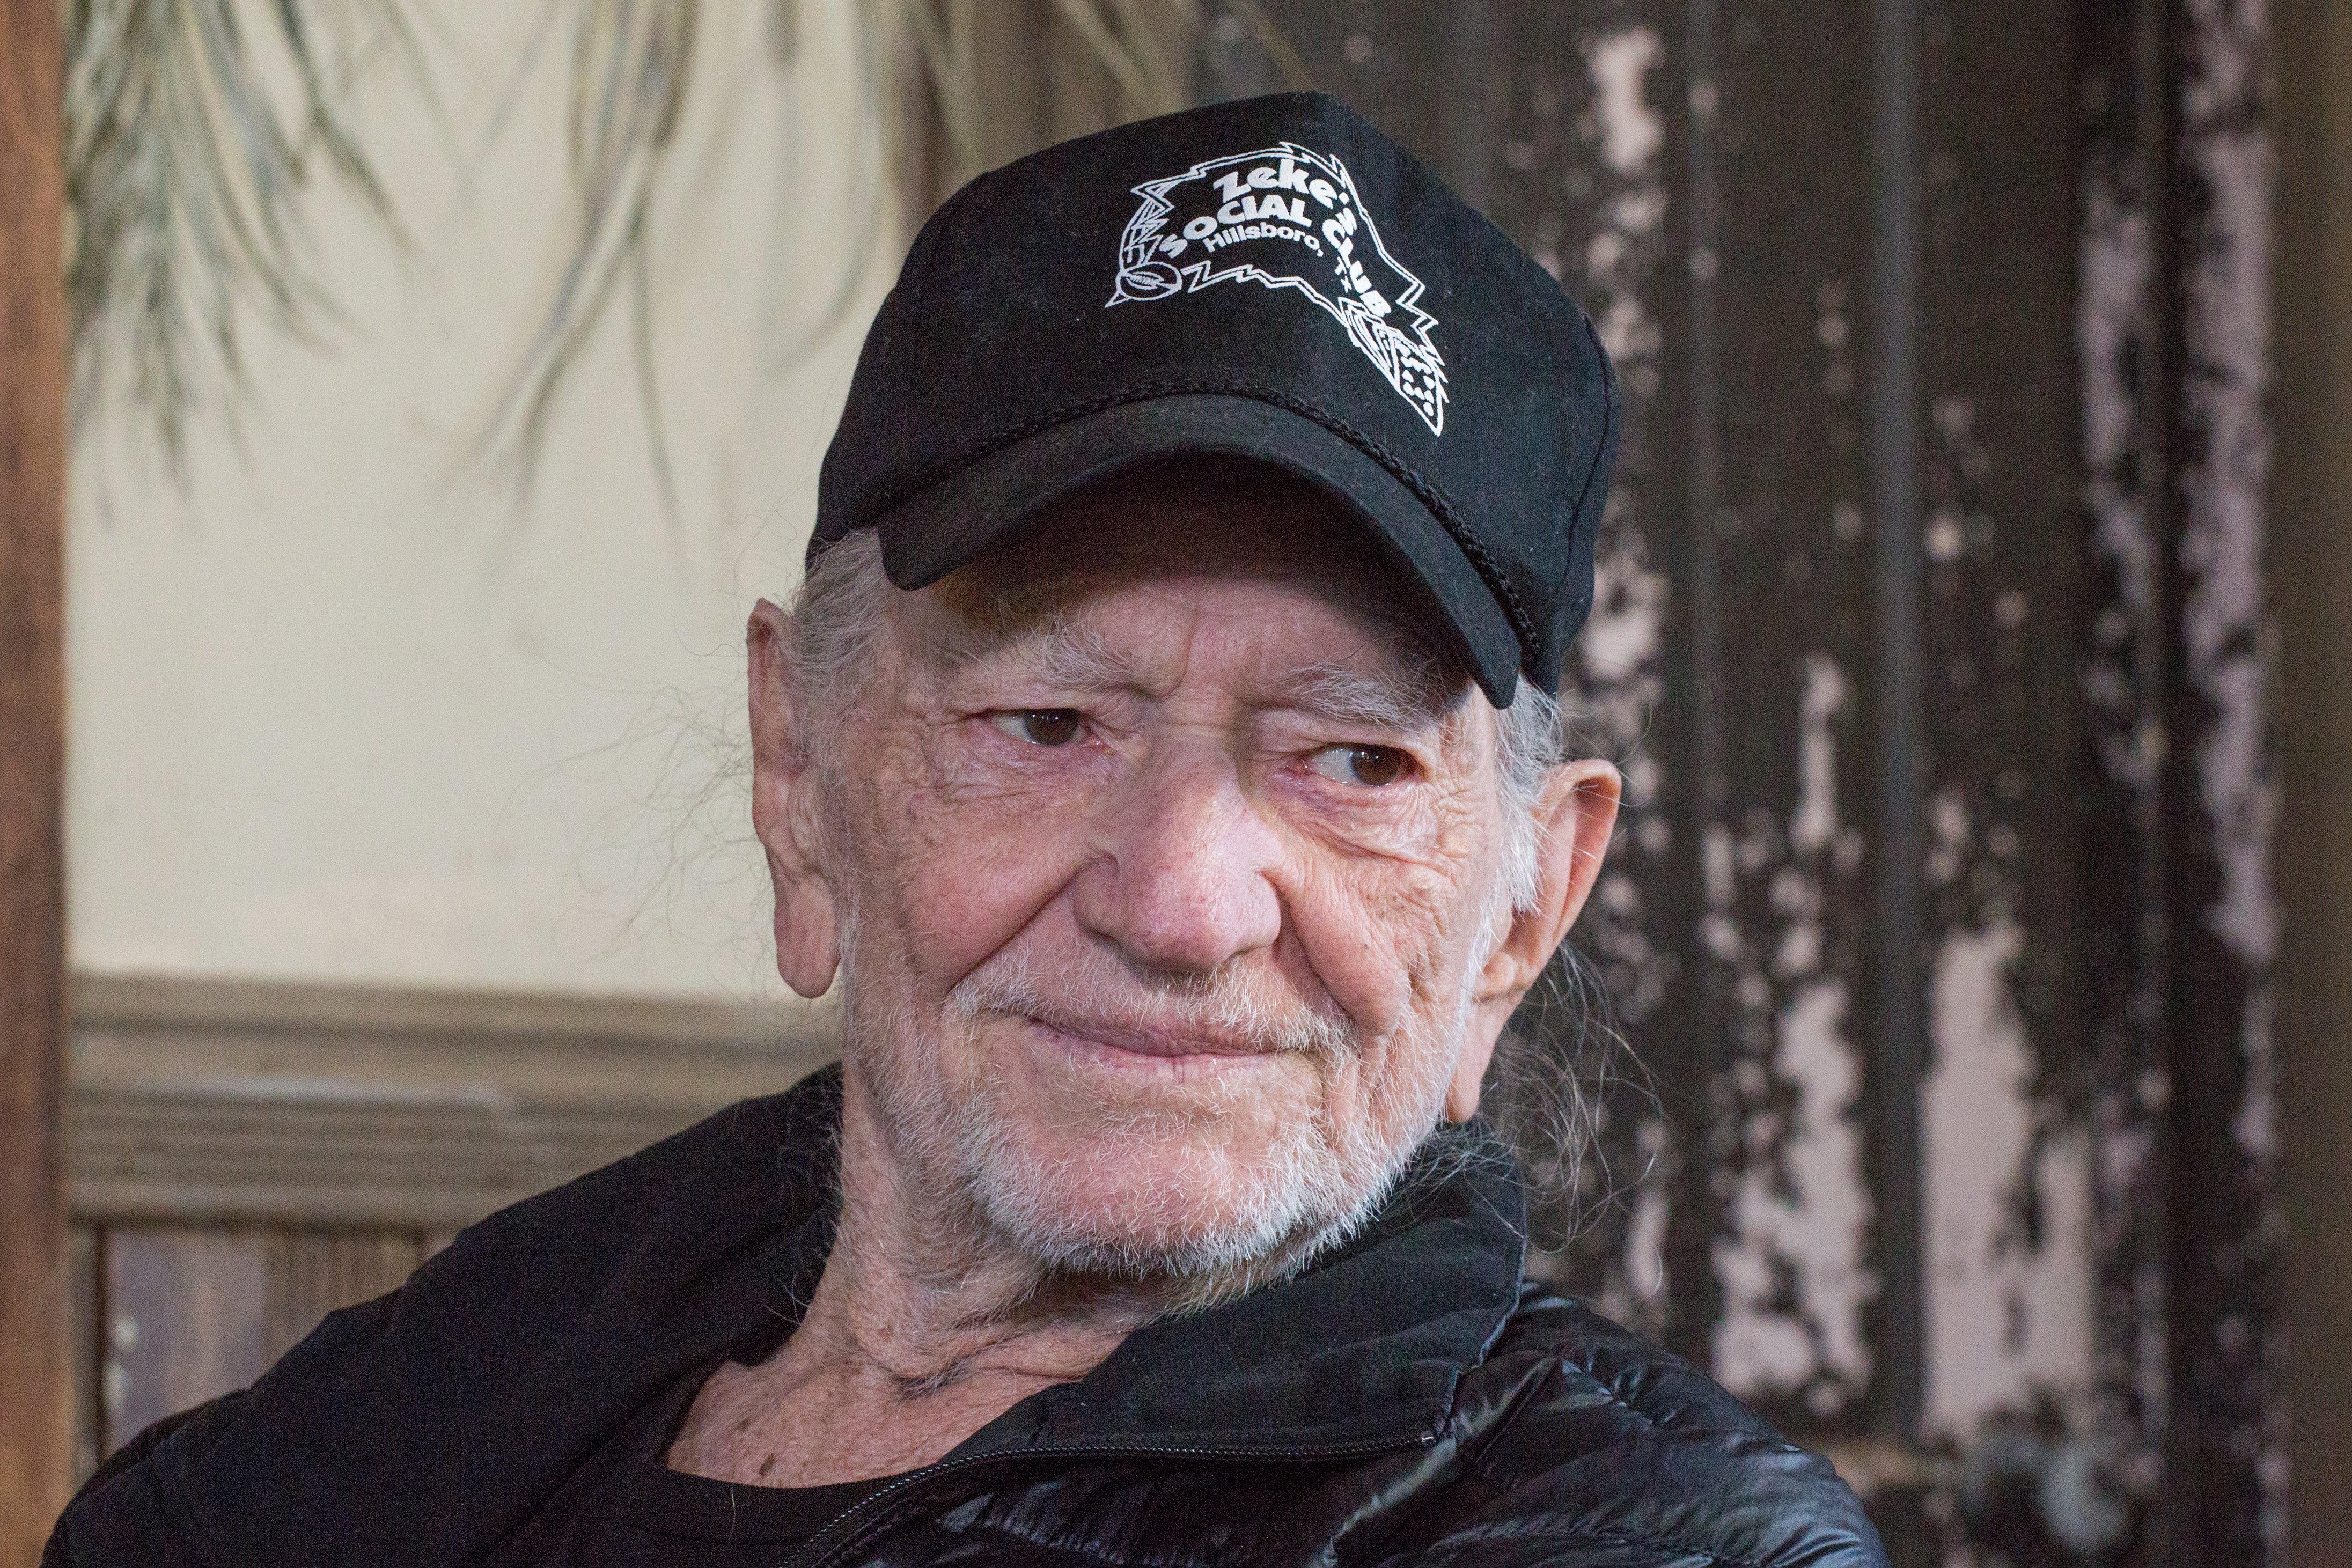 Willie Nelson at Luck Ranch on April 13, 2019 in Spicewood, Texas | Source: Getty Images